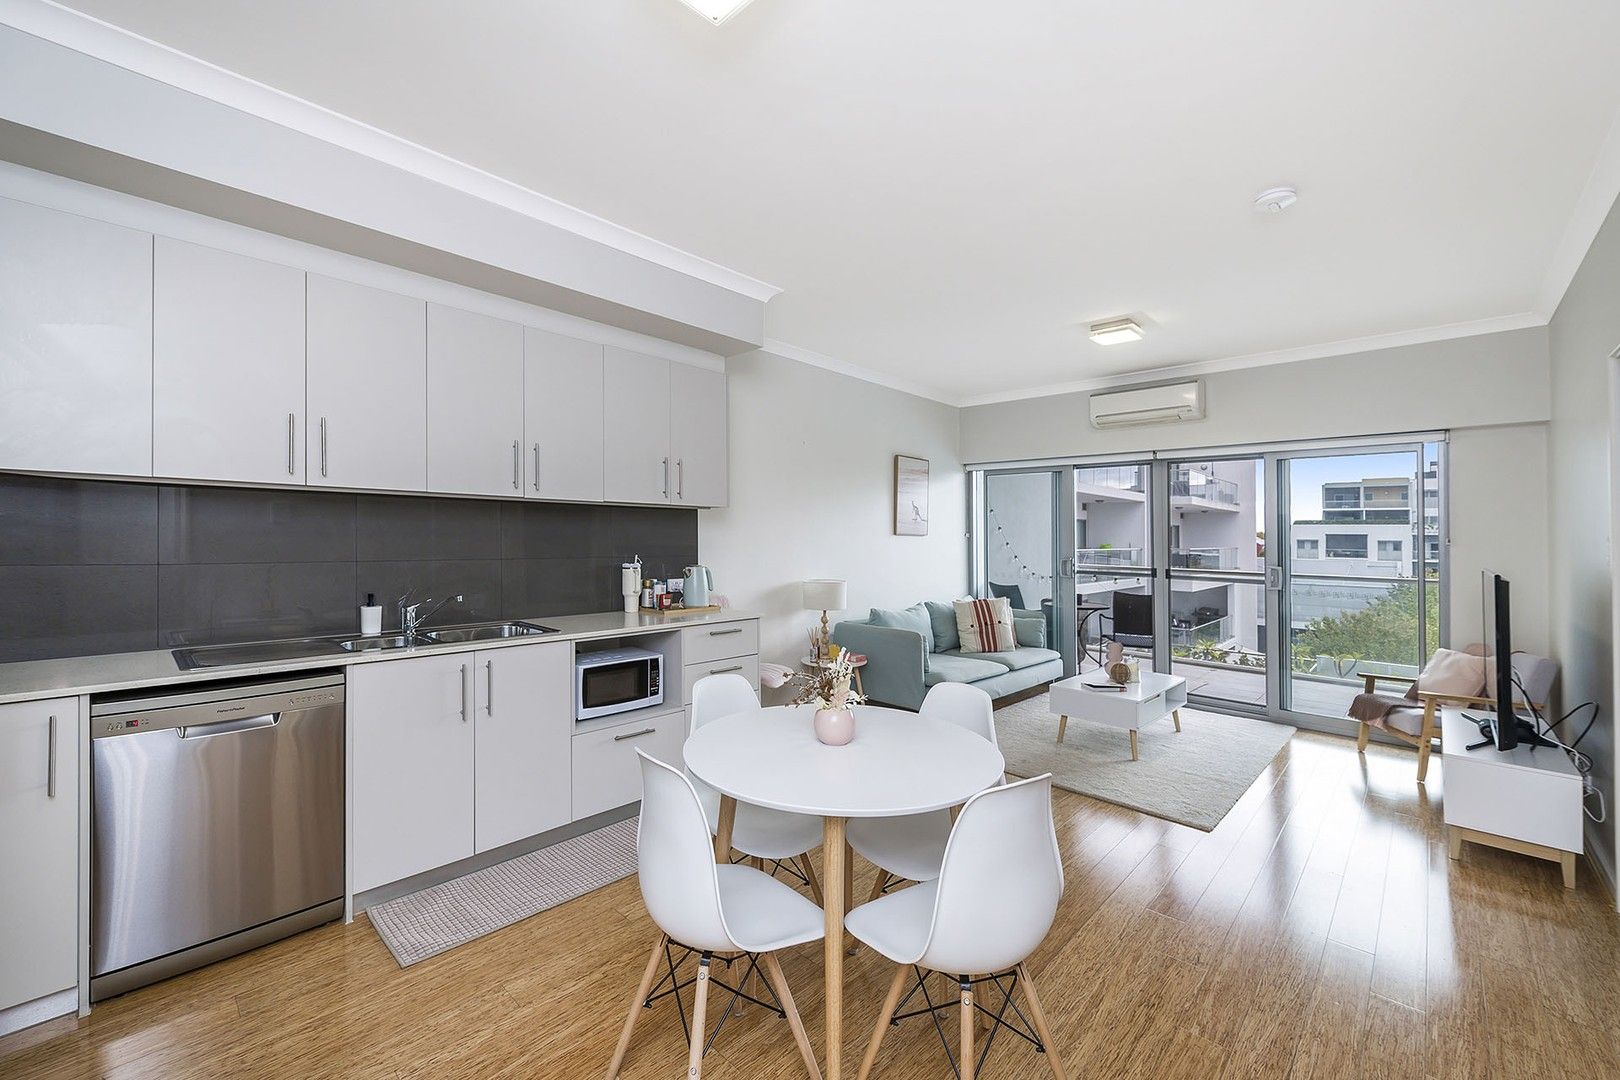 1 bedrooms Apartment / Unit / Flat in 47/177 Stirling Street PERTH WA, 6000